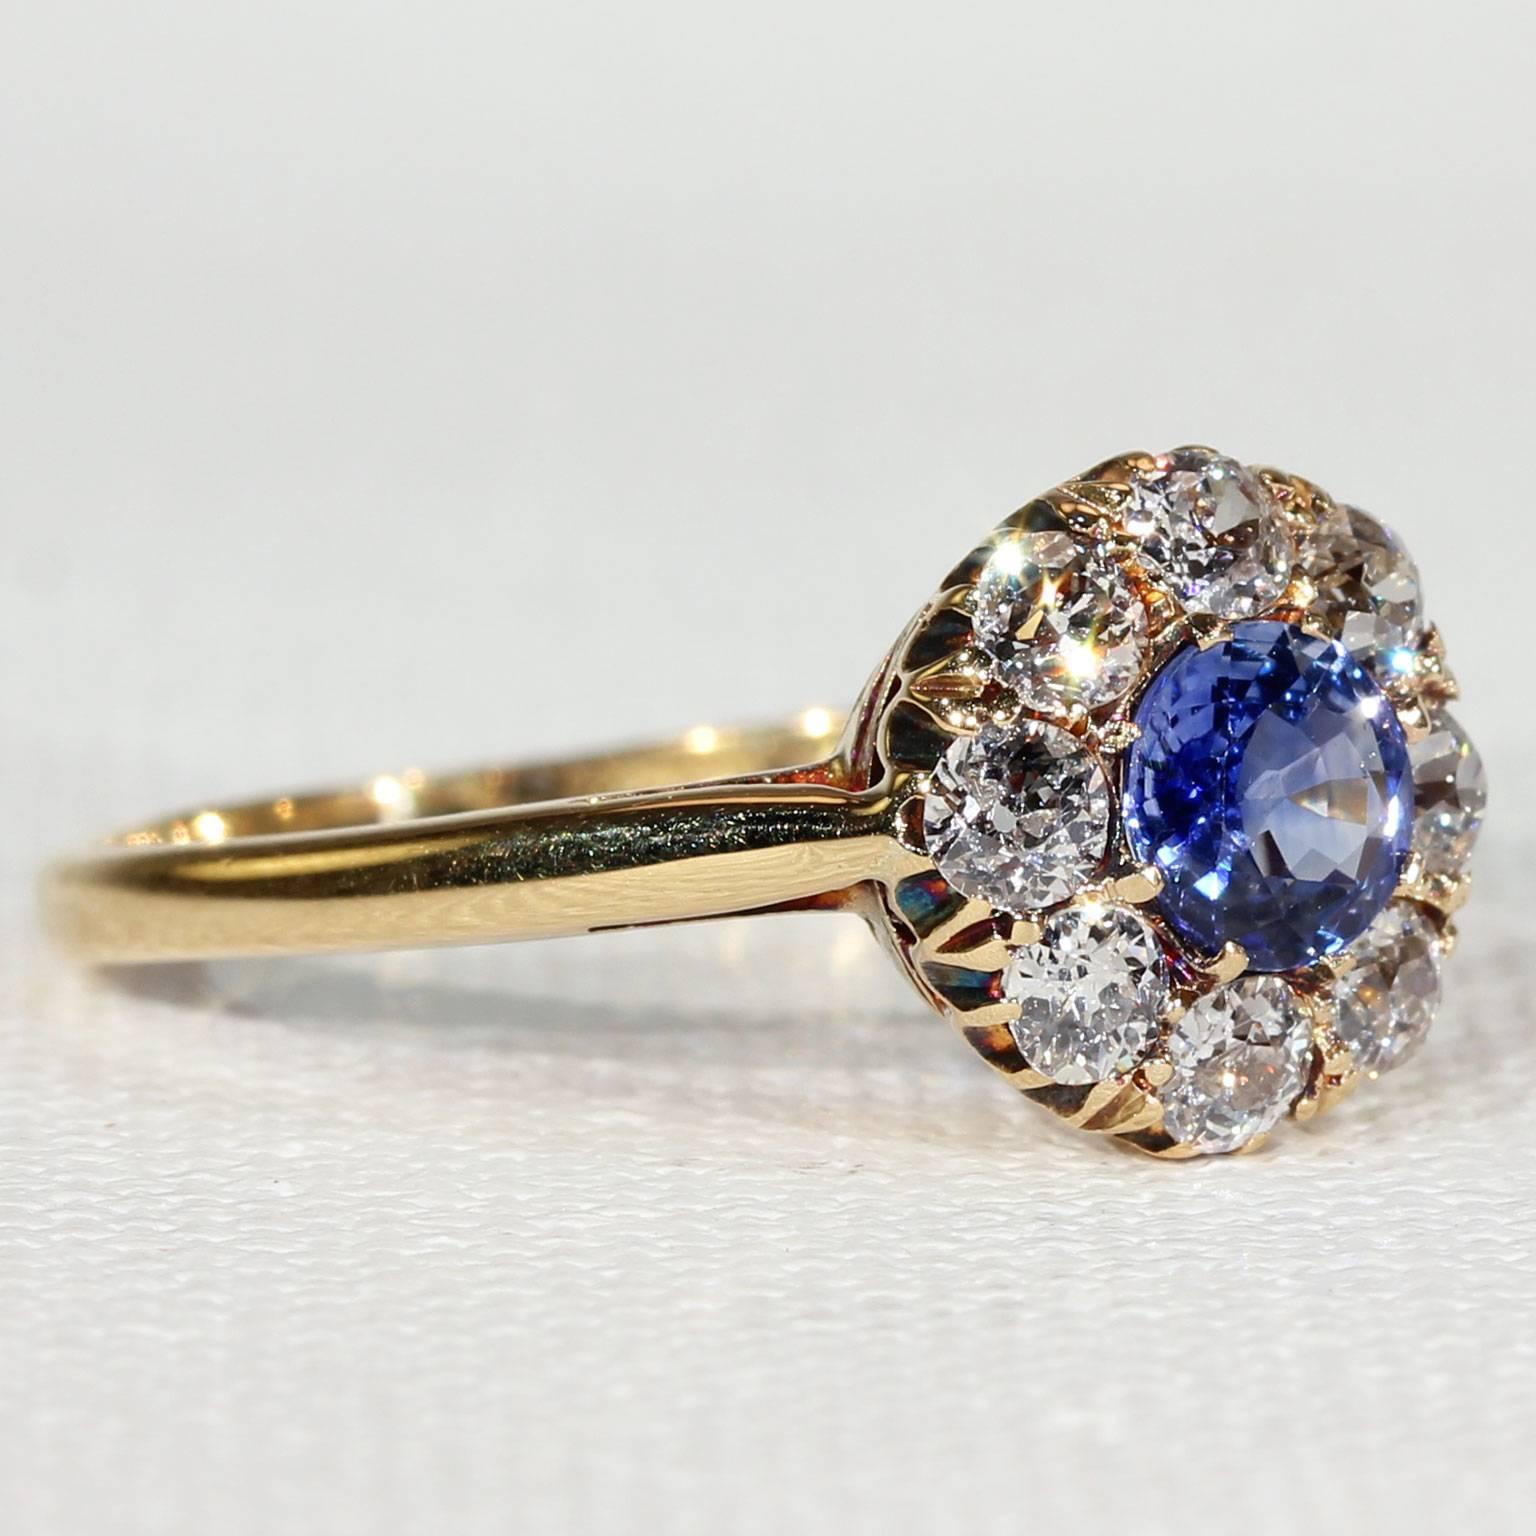 This antique sapphire and diamond cluster ring was hand crafted in England during the Victorian Era, around 1900. The center round faceted sapphire weighs approximately .65 carats. The lovely blue center is surrounded by eight Old European cut